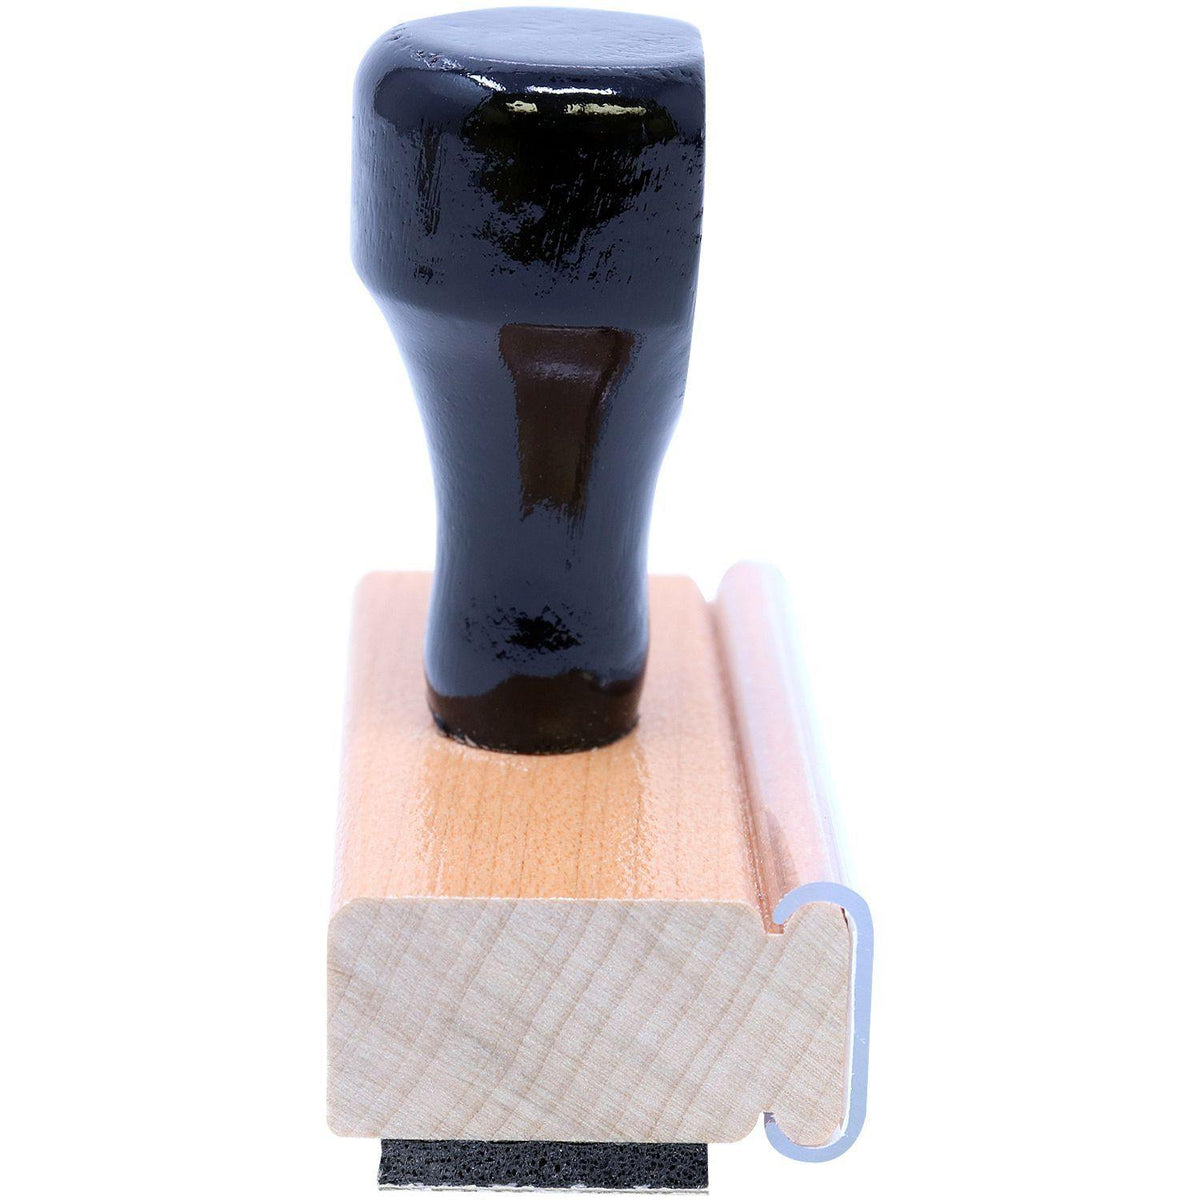 Narrow Font Non-Smoker Rubber Stamp - Engineer Seal Stamps - Brand_Acorn, Impression Size_Small, Stamp Type_Regular Stamp, Type of Use_Medical Office